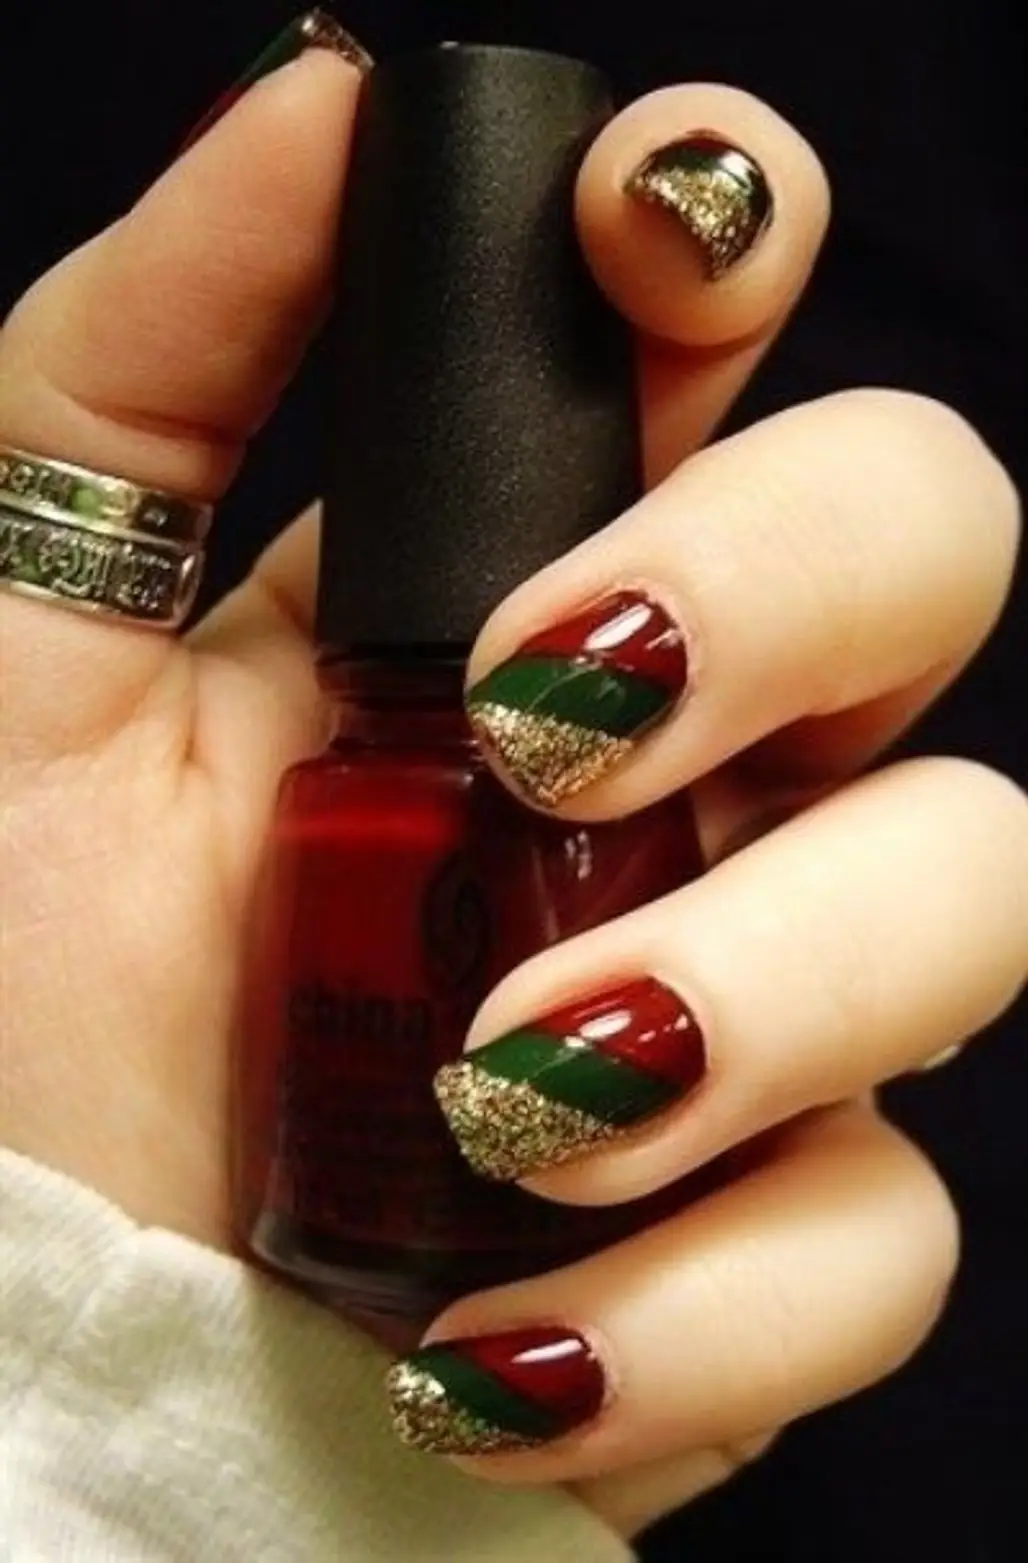 nail,color,finger,green,red,